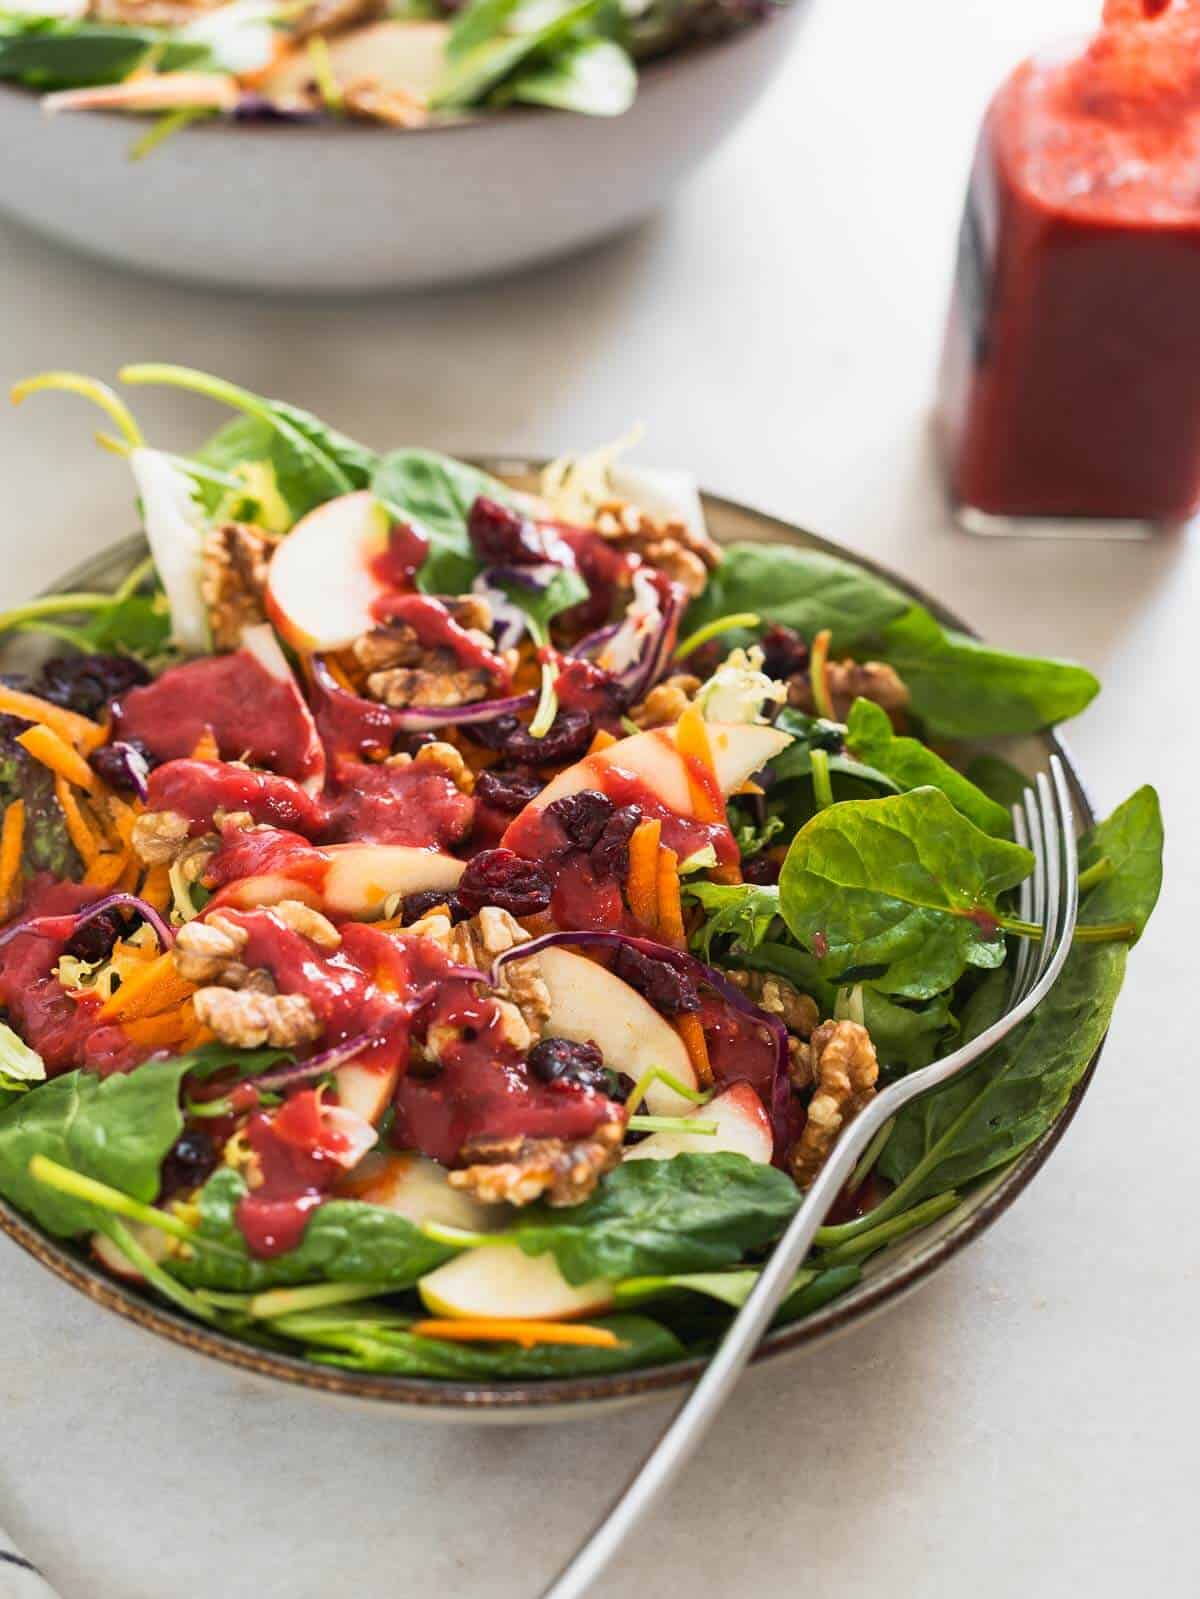 Spinach Apple Walnut Salad topped with raspberry dressing.